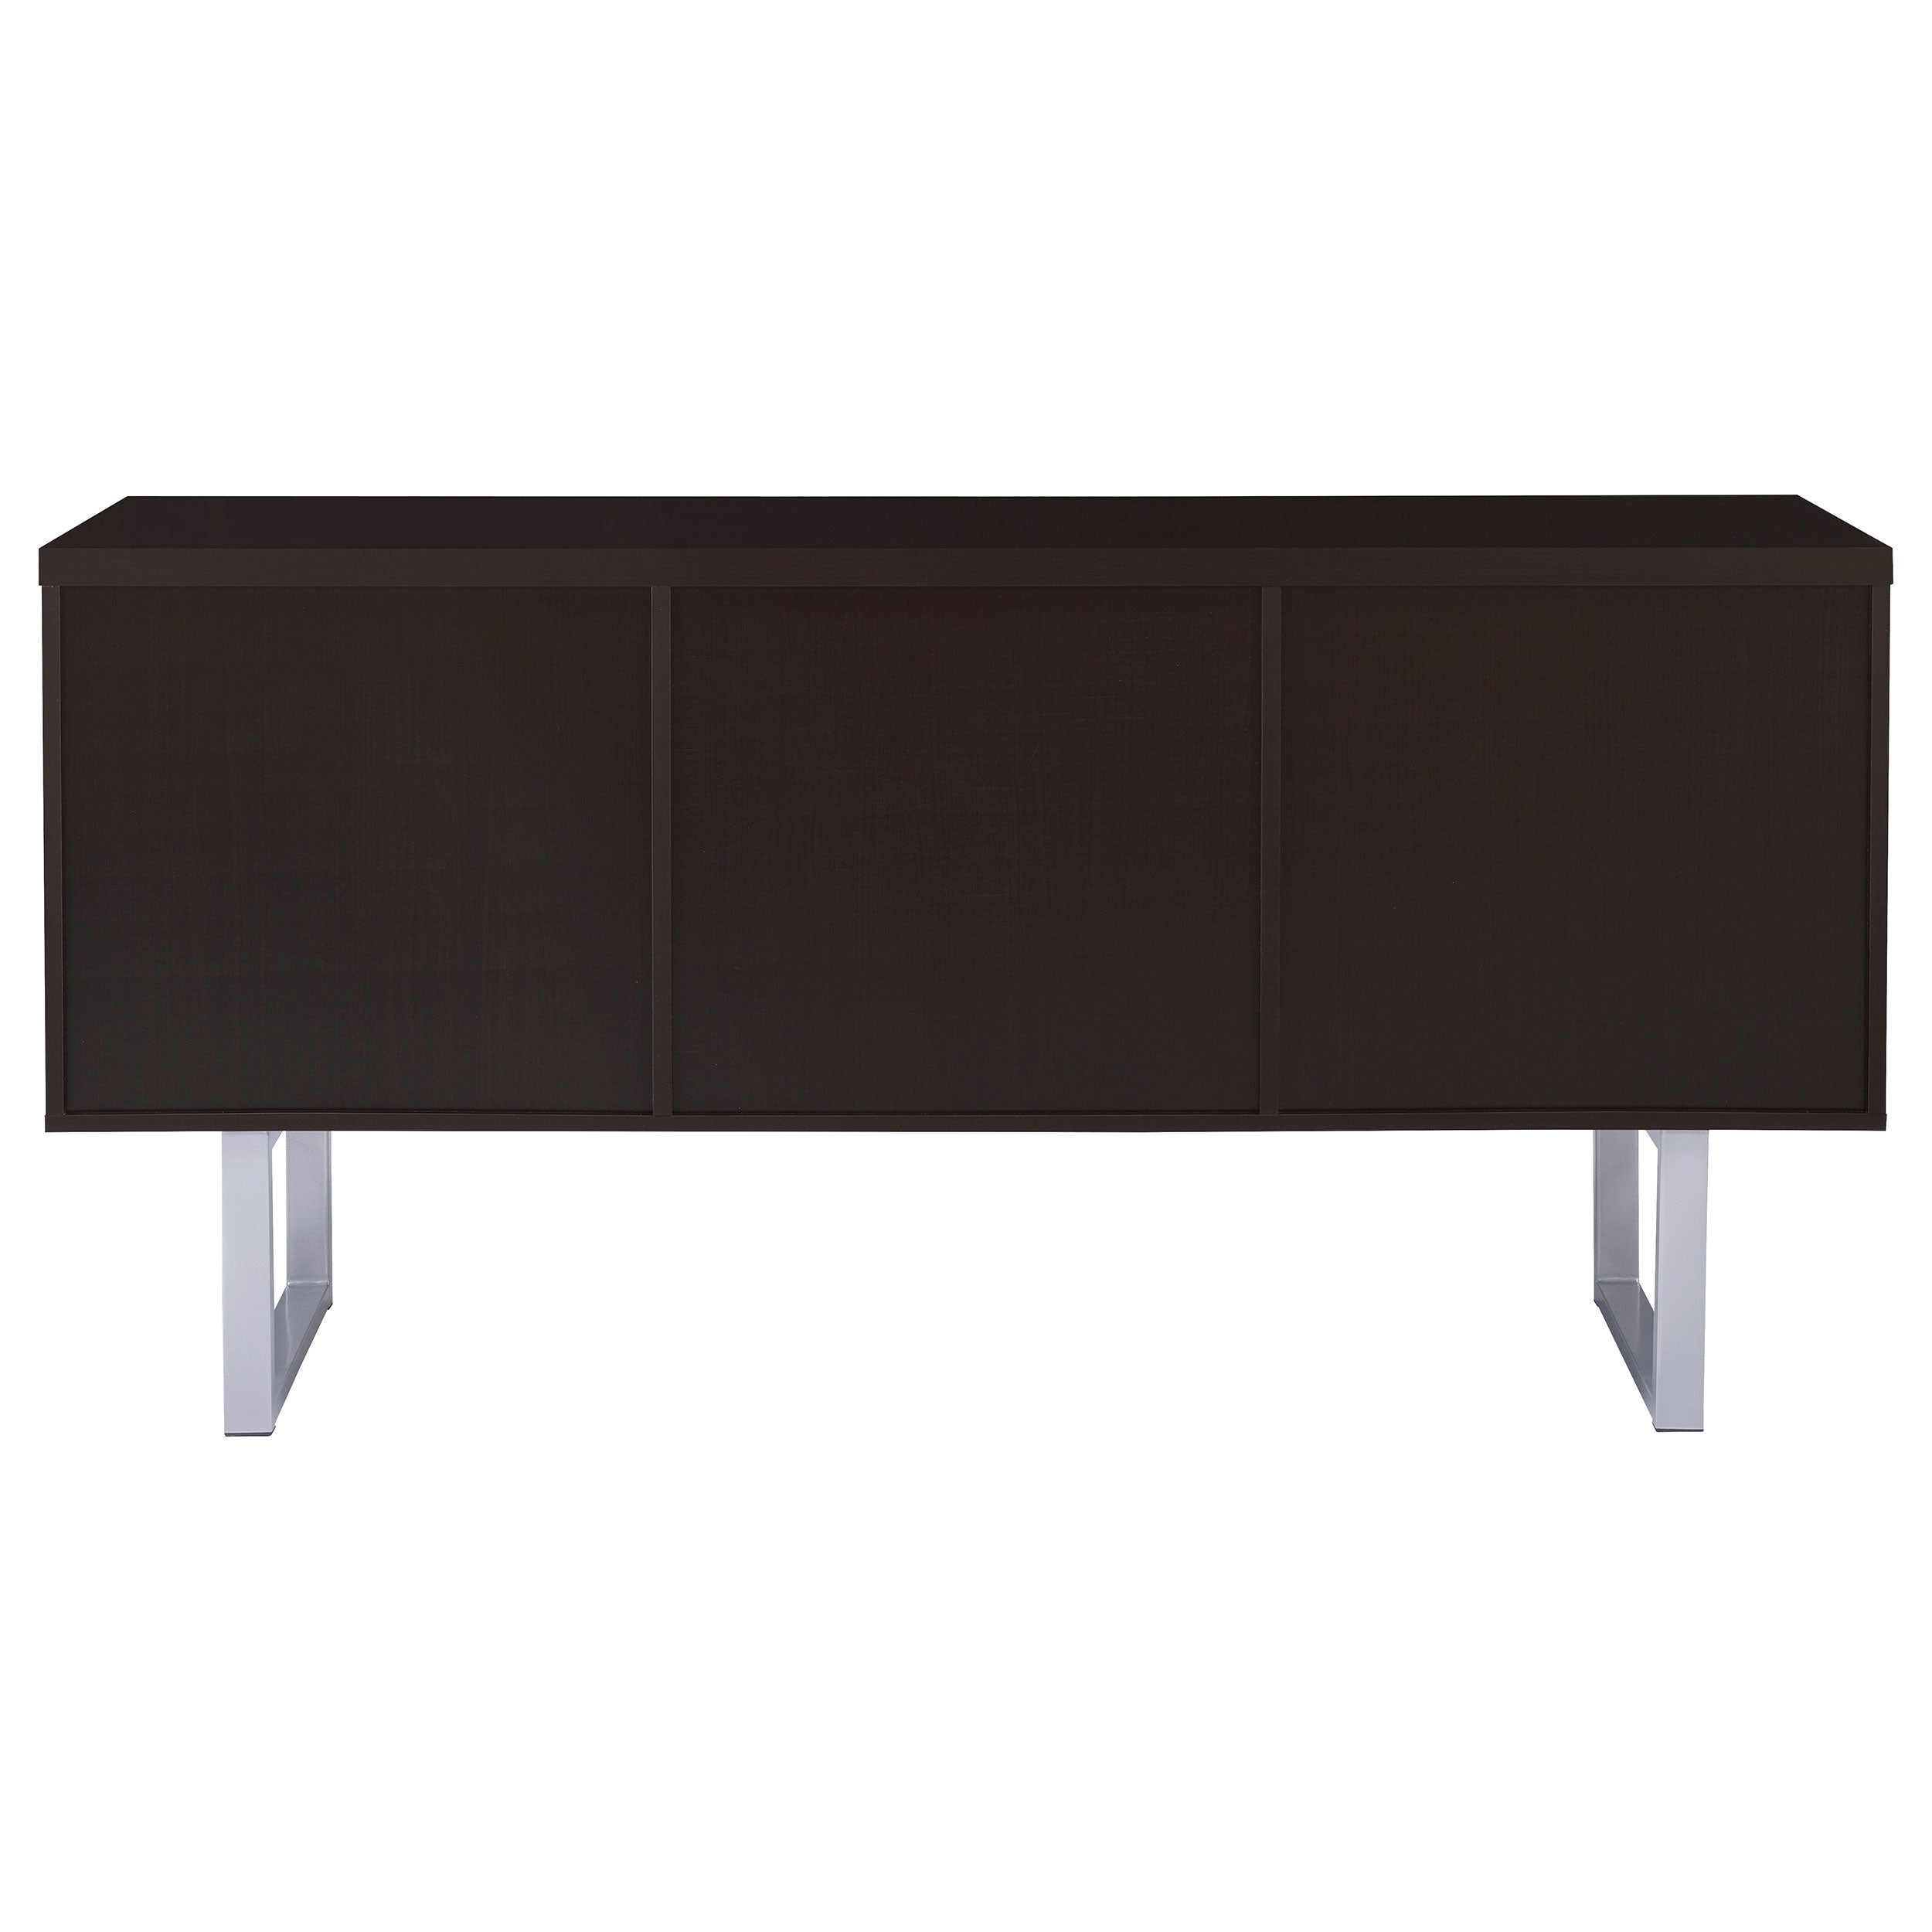 Lawtey 5-drawer Credenza with Adjustable Shelf Cappuccino